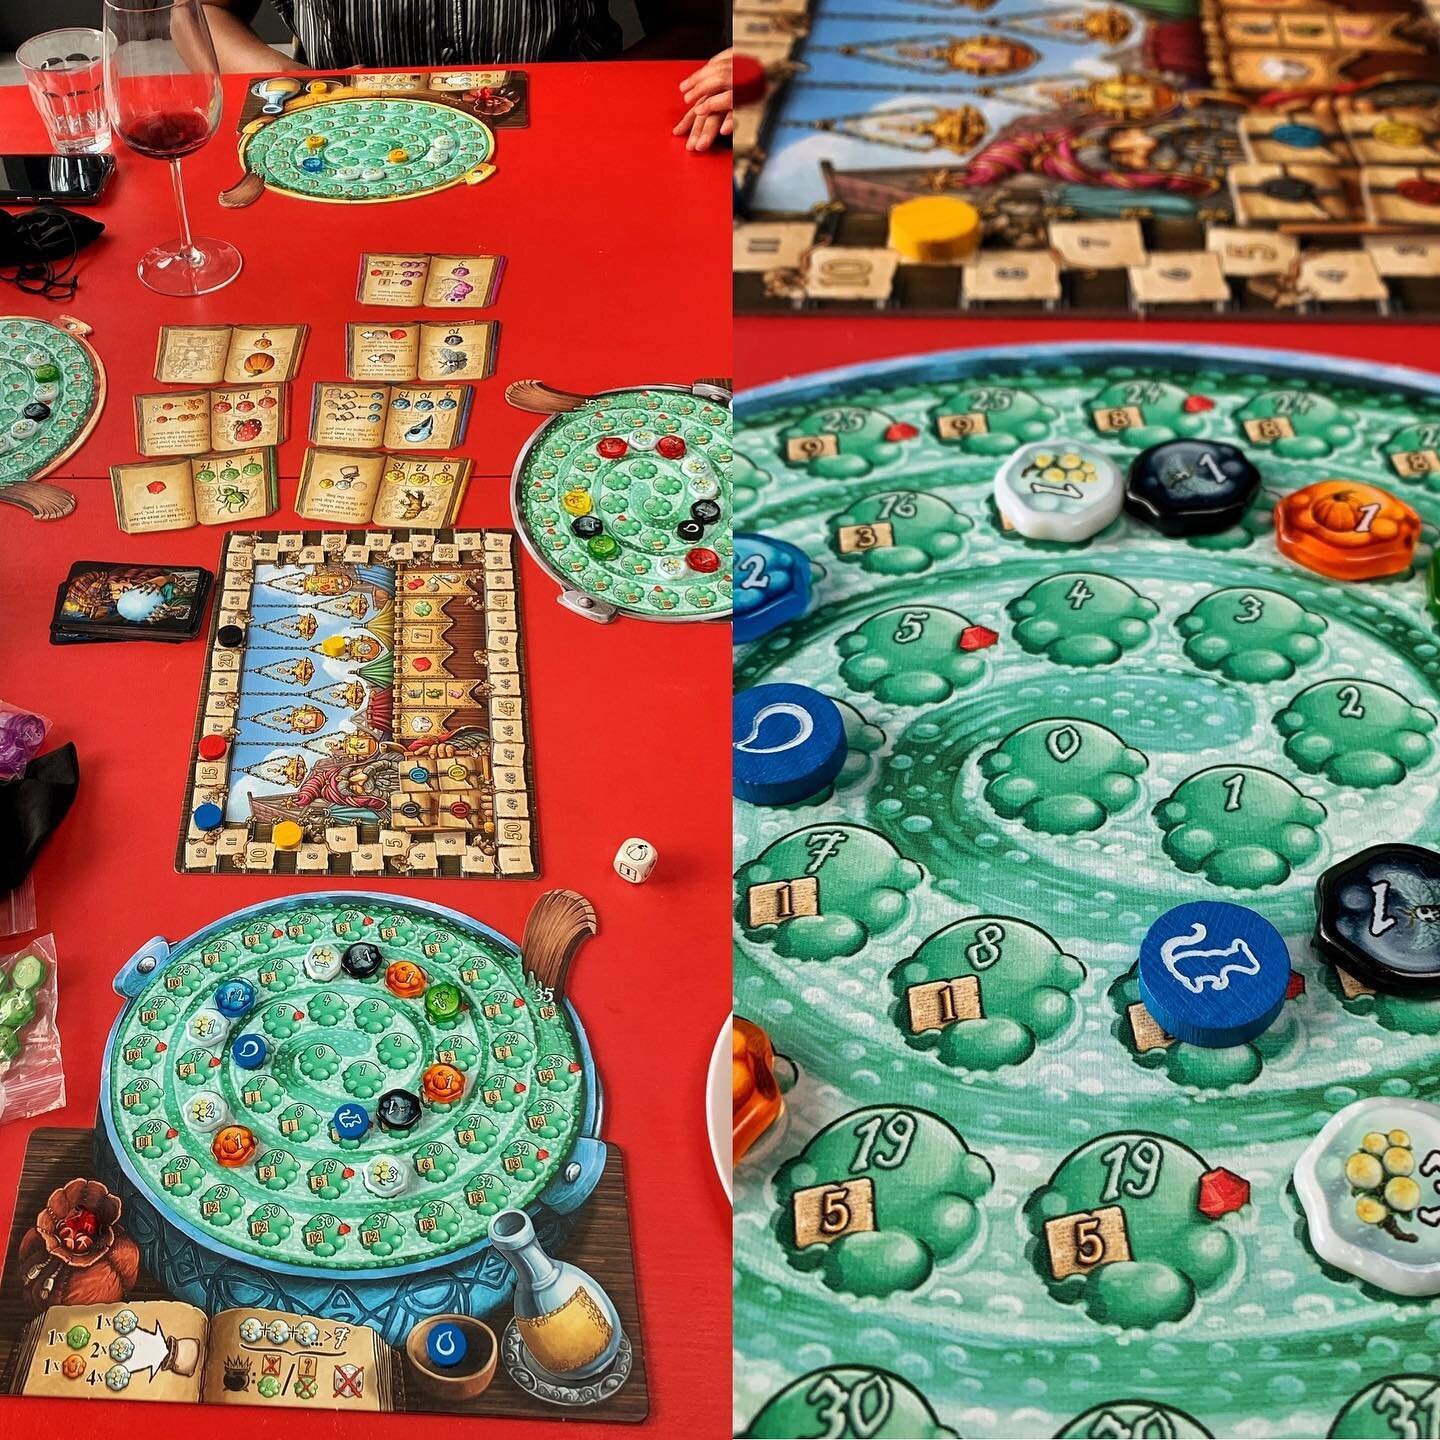 God to play 4,player Quacks of Quedlingburg with the chunky and wonderfully clacky geek up bits bought at #gencon2022 and despite them being more expensive than the game itself they were completely worth it. And I won! Thanks to @dddommm and @vesilva